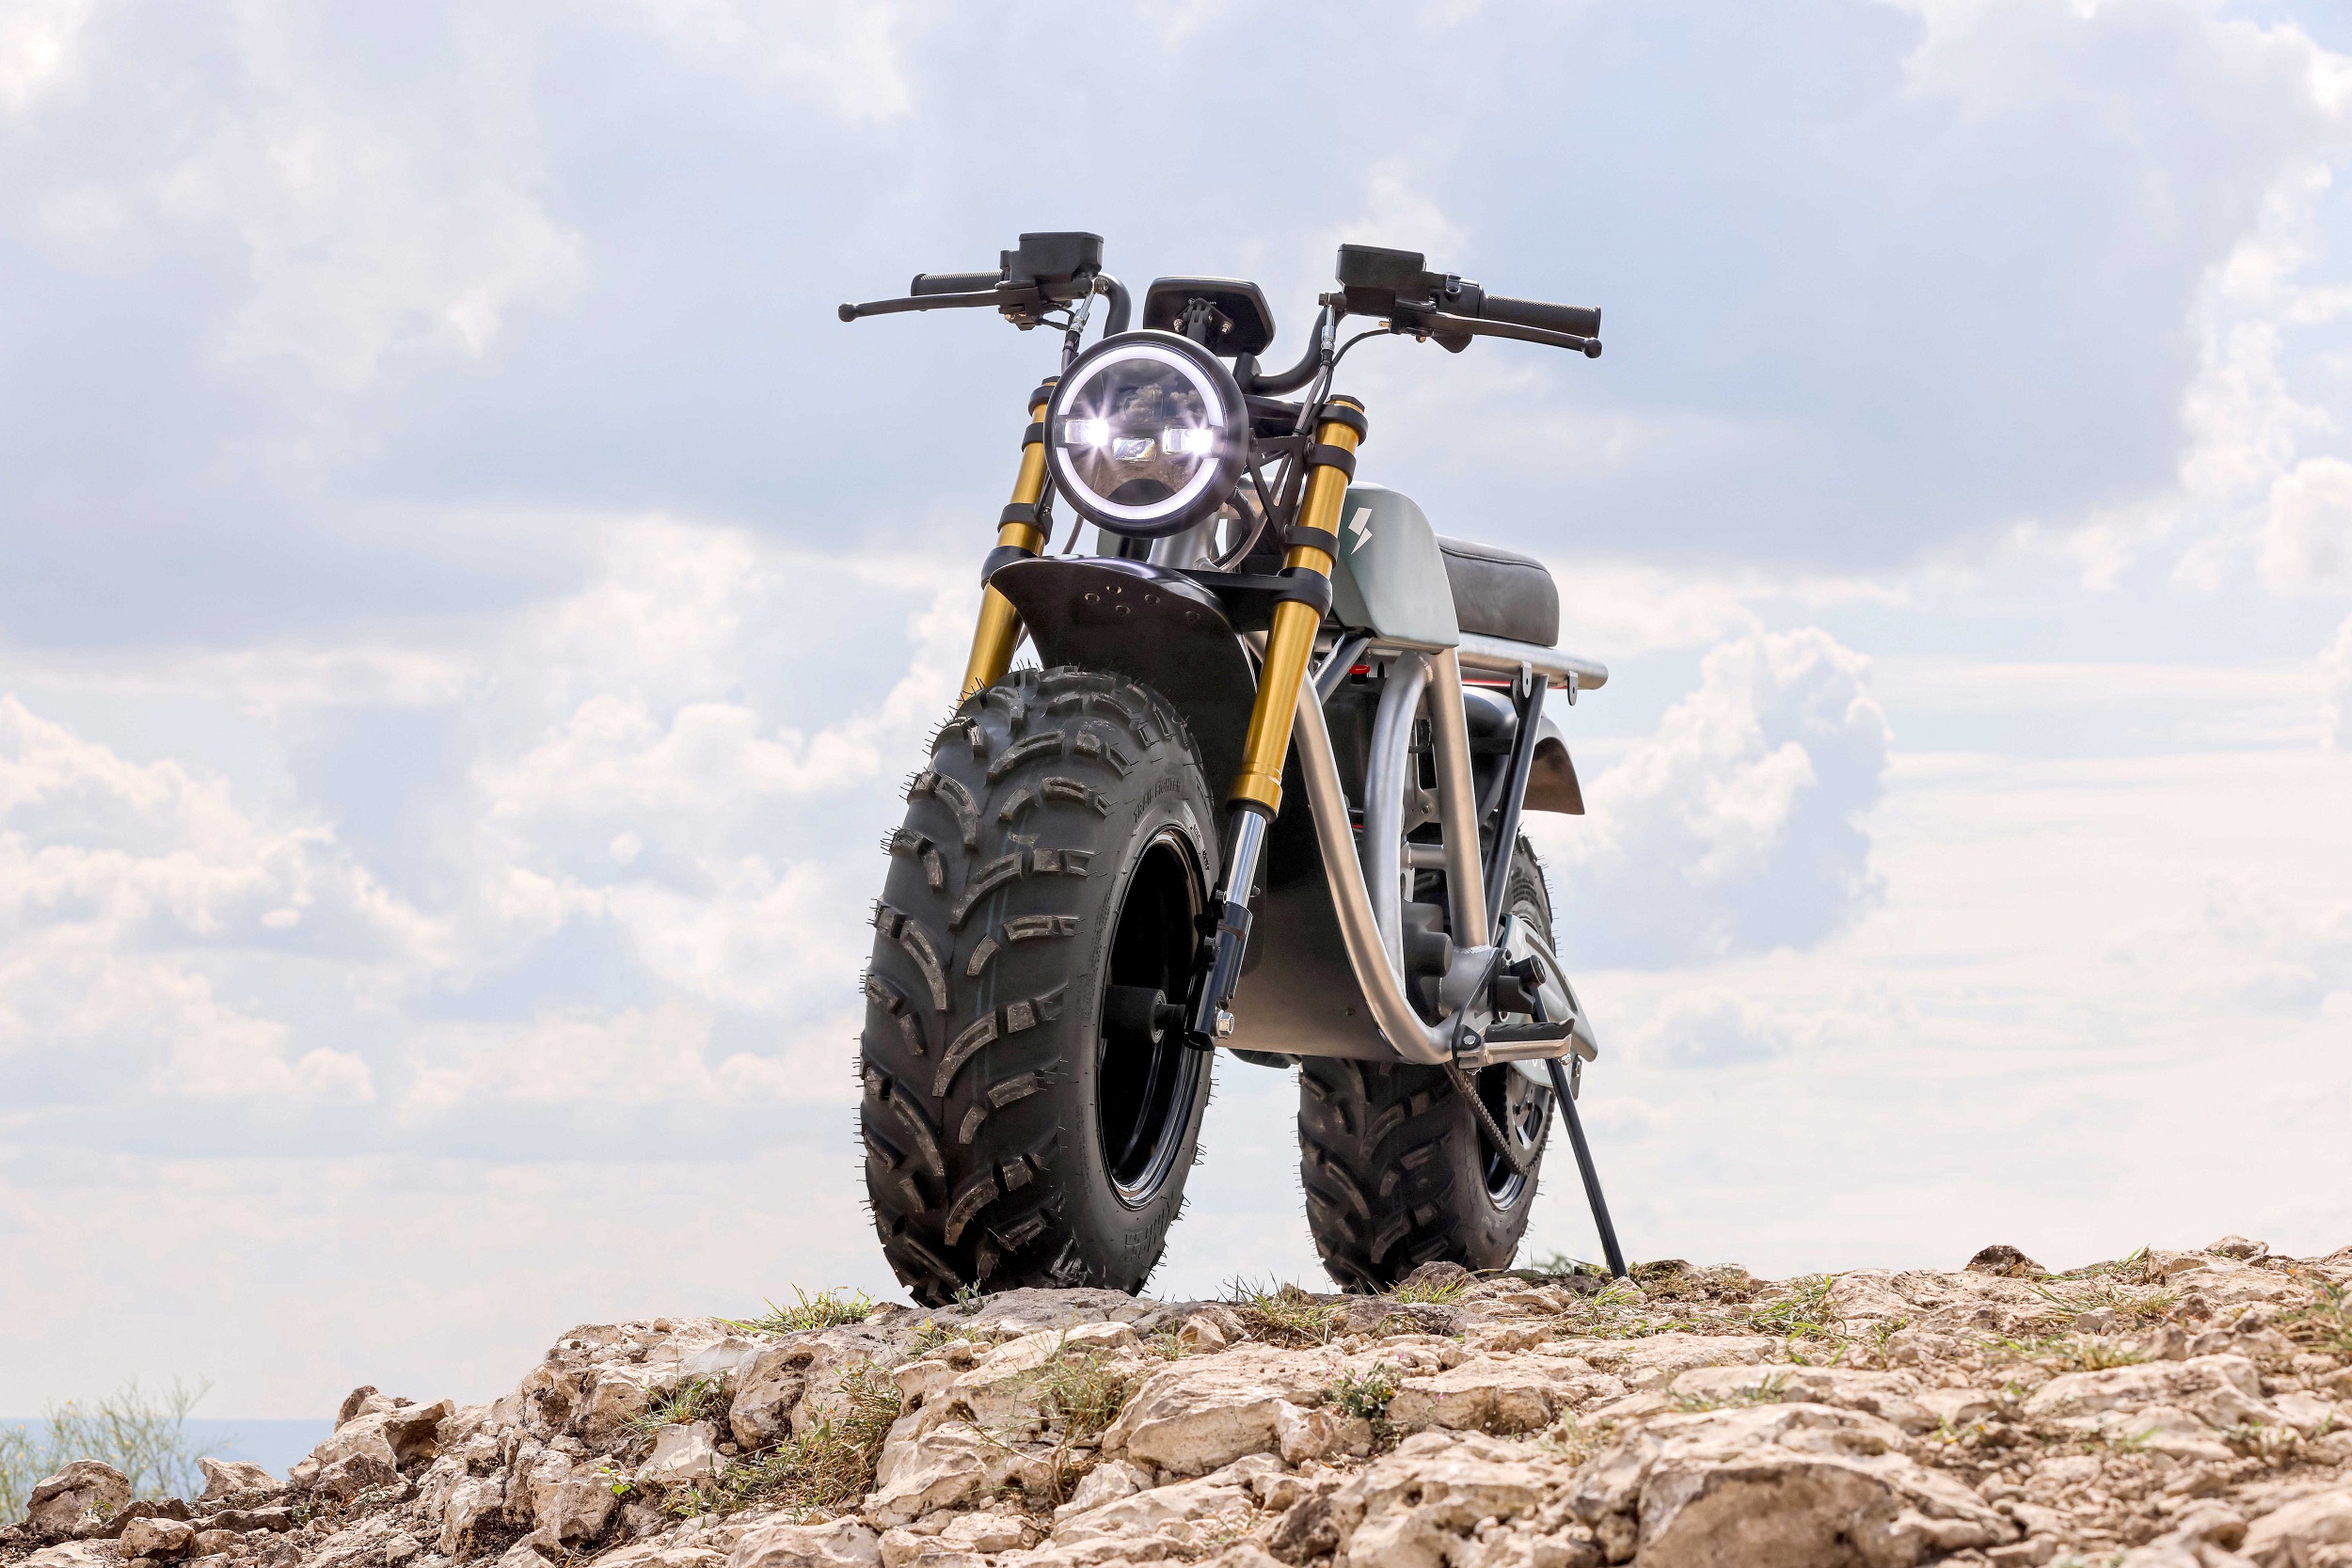 Volcon Grunt electric off-road motorcycle announced